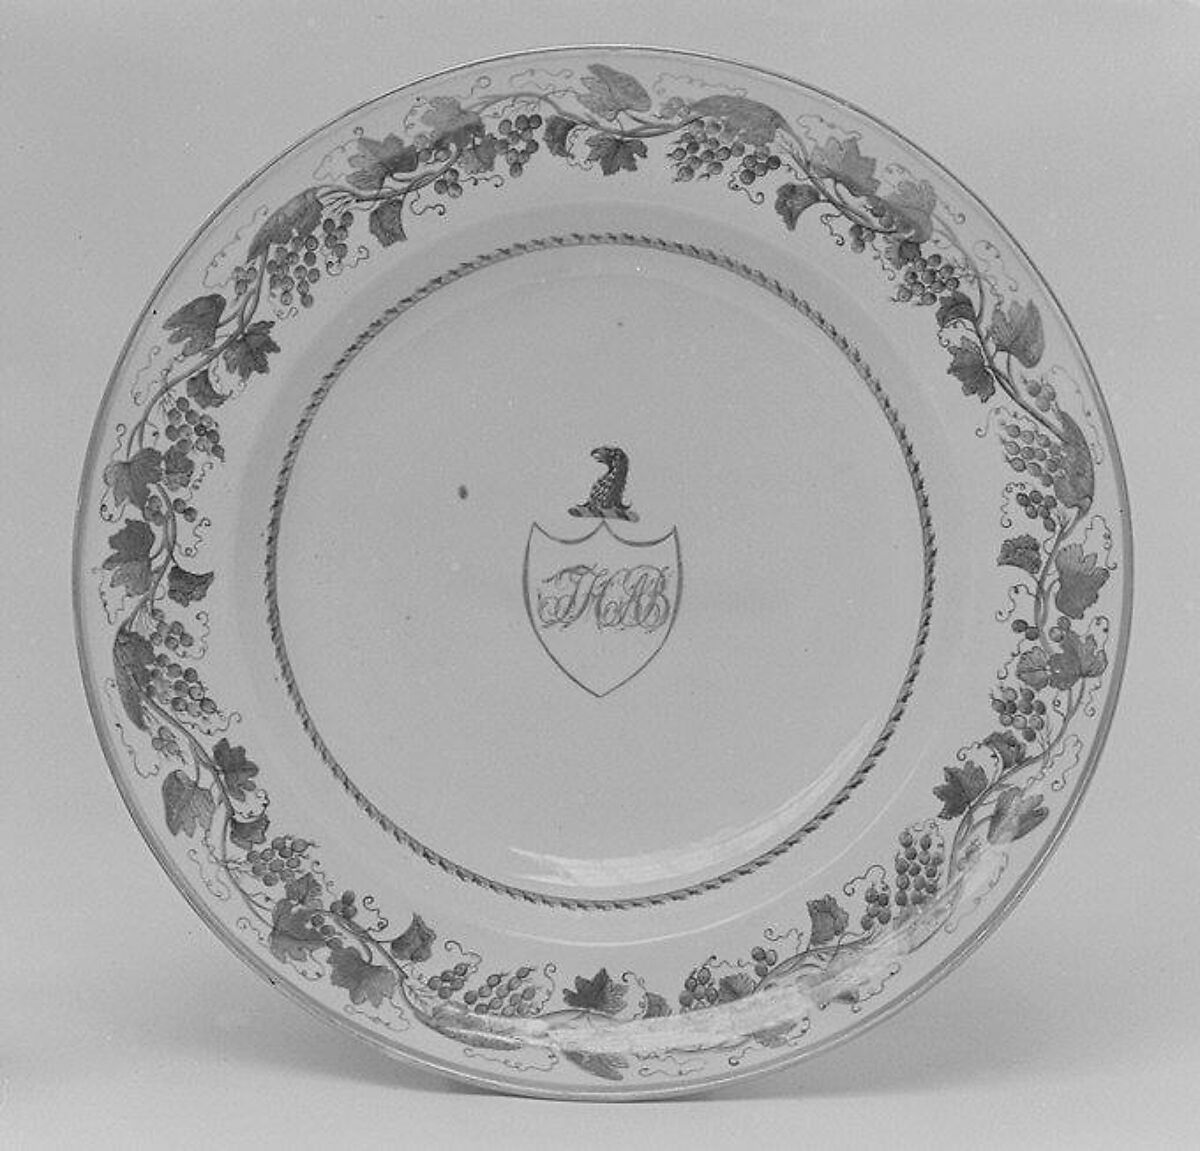 Soup dish (part of a service), Hard-paste porcelain, Chinese, for British market 